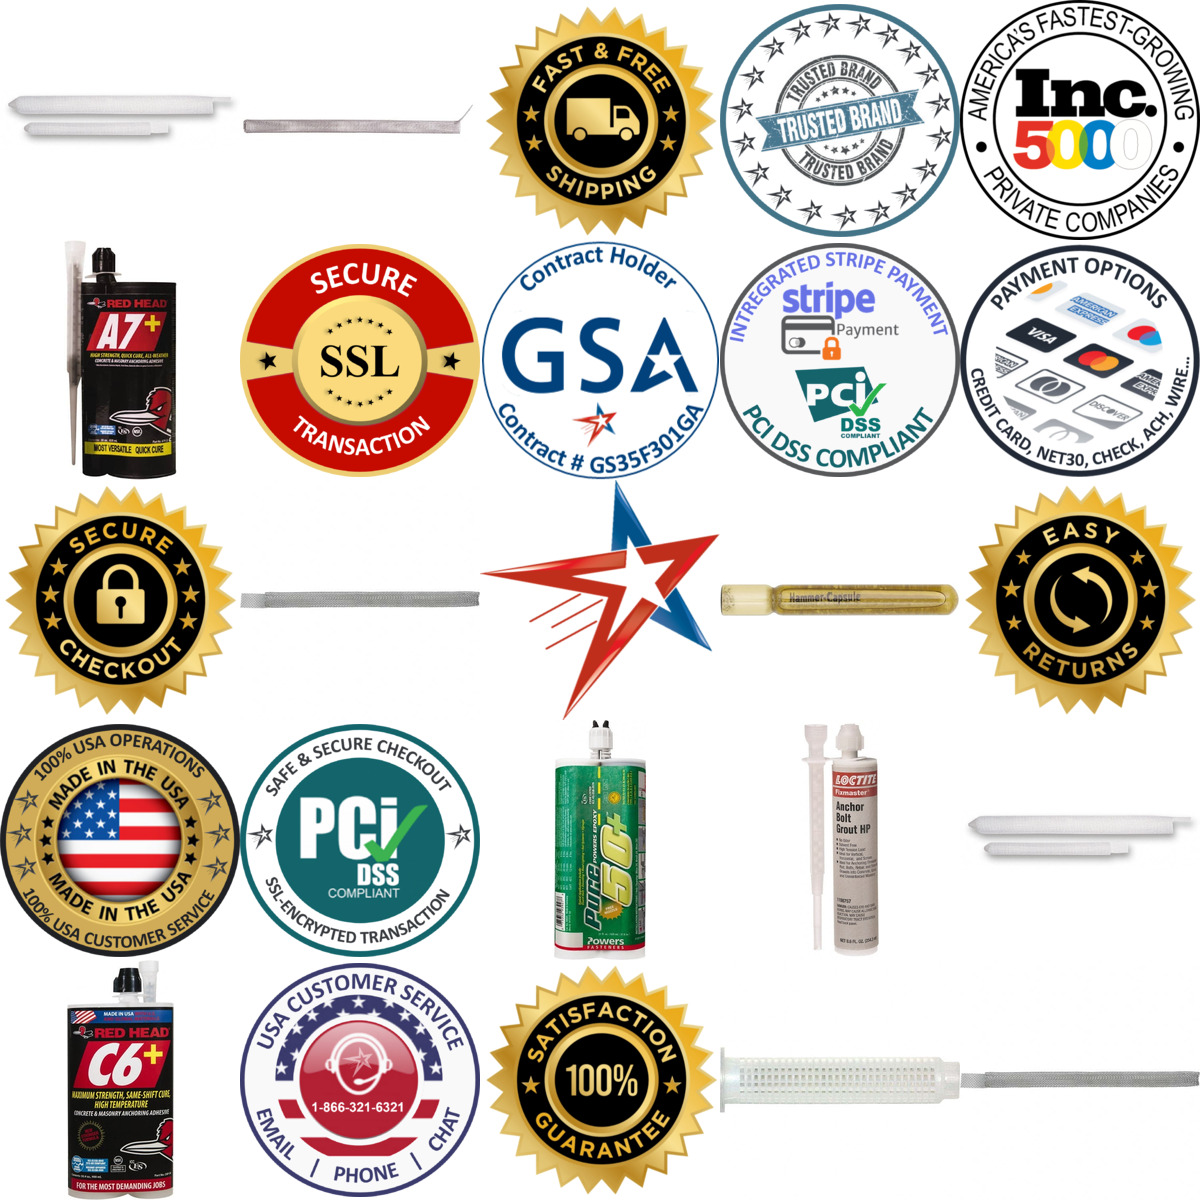 A selection of Adhesive Anchoring Systems products on GoVets